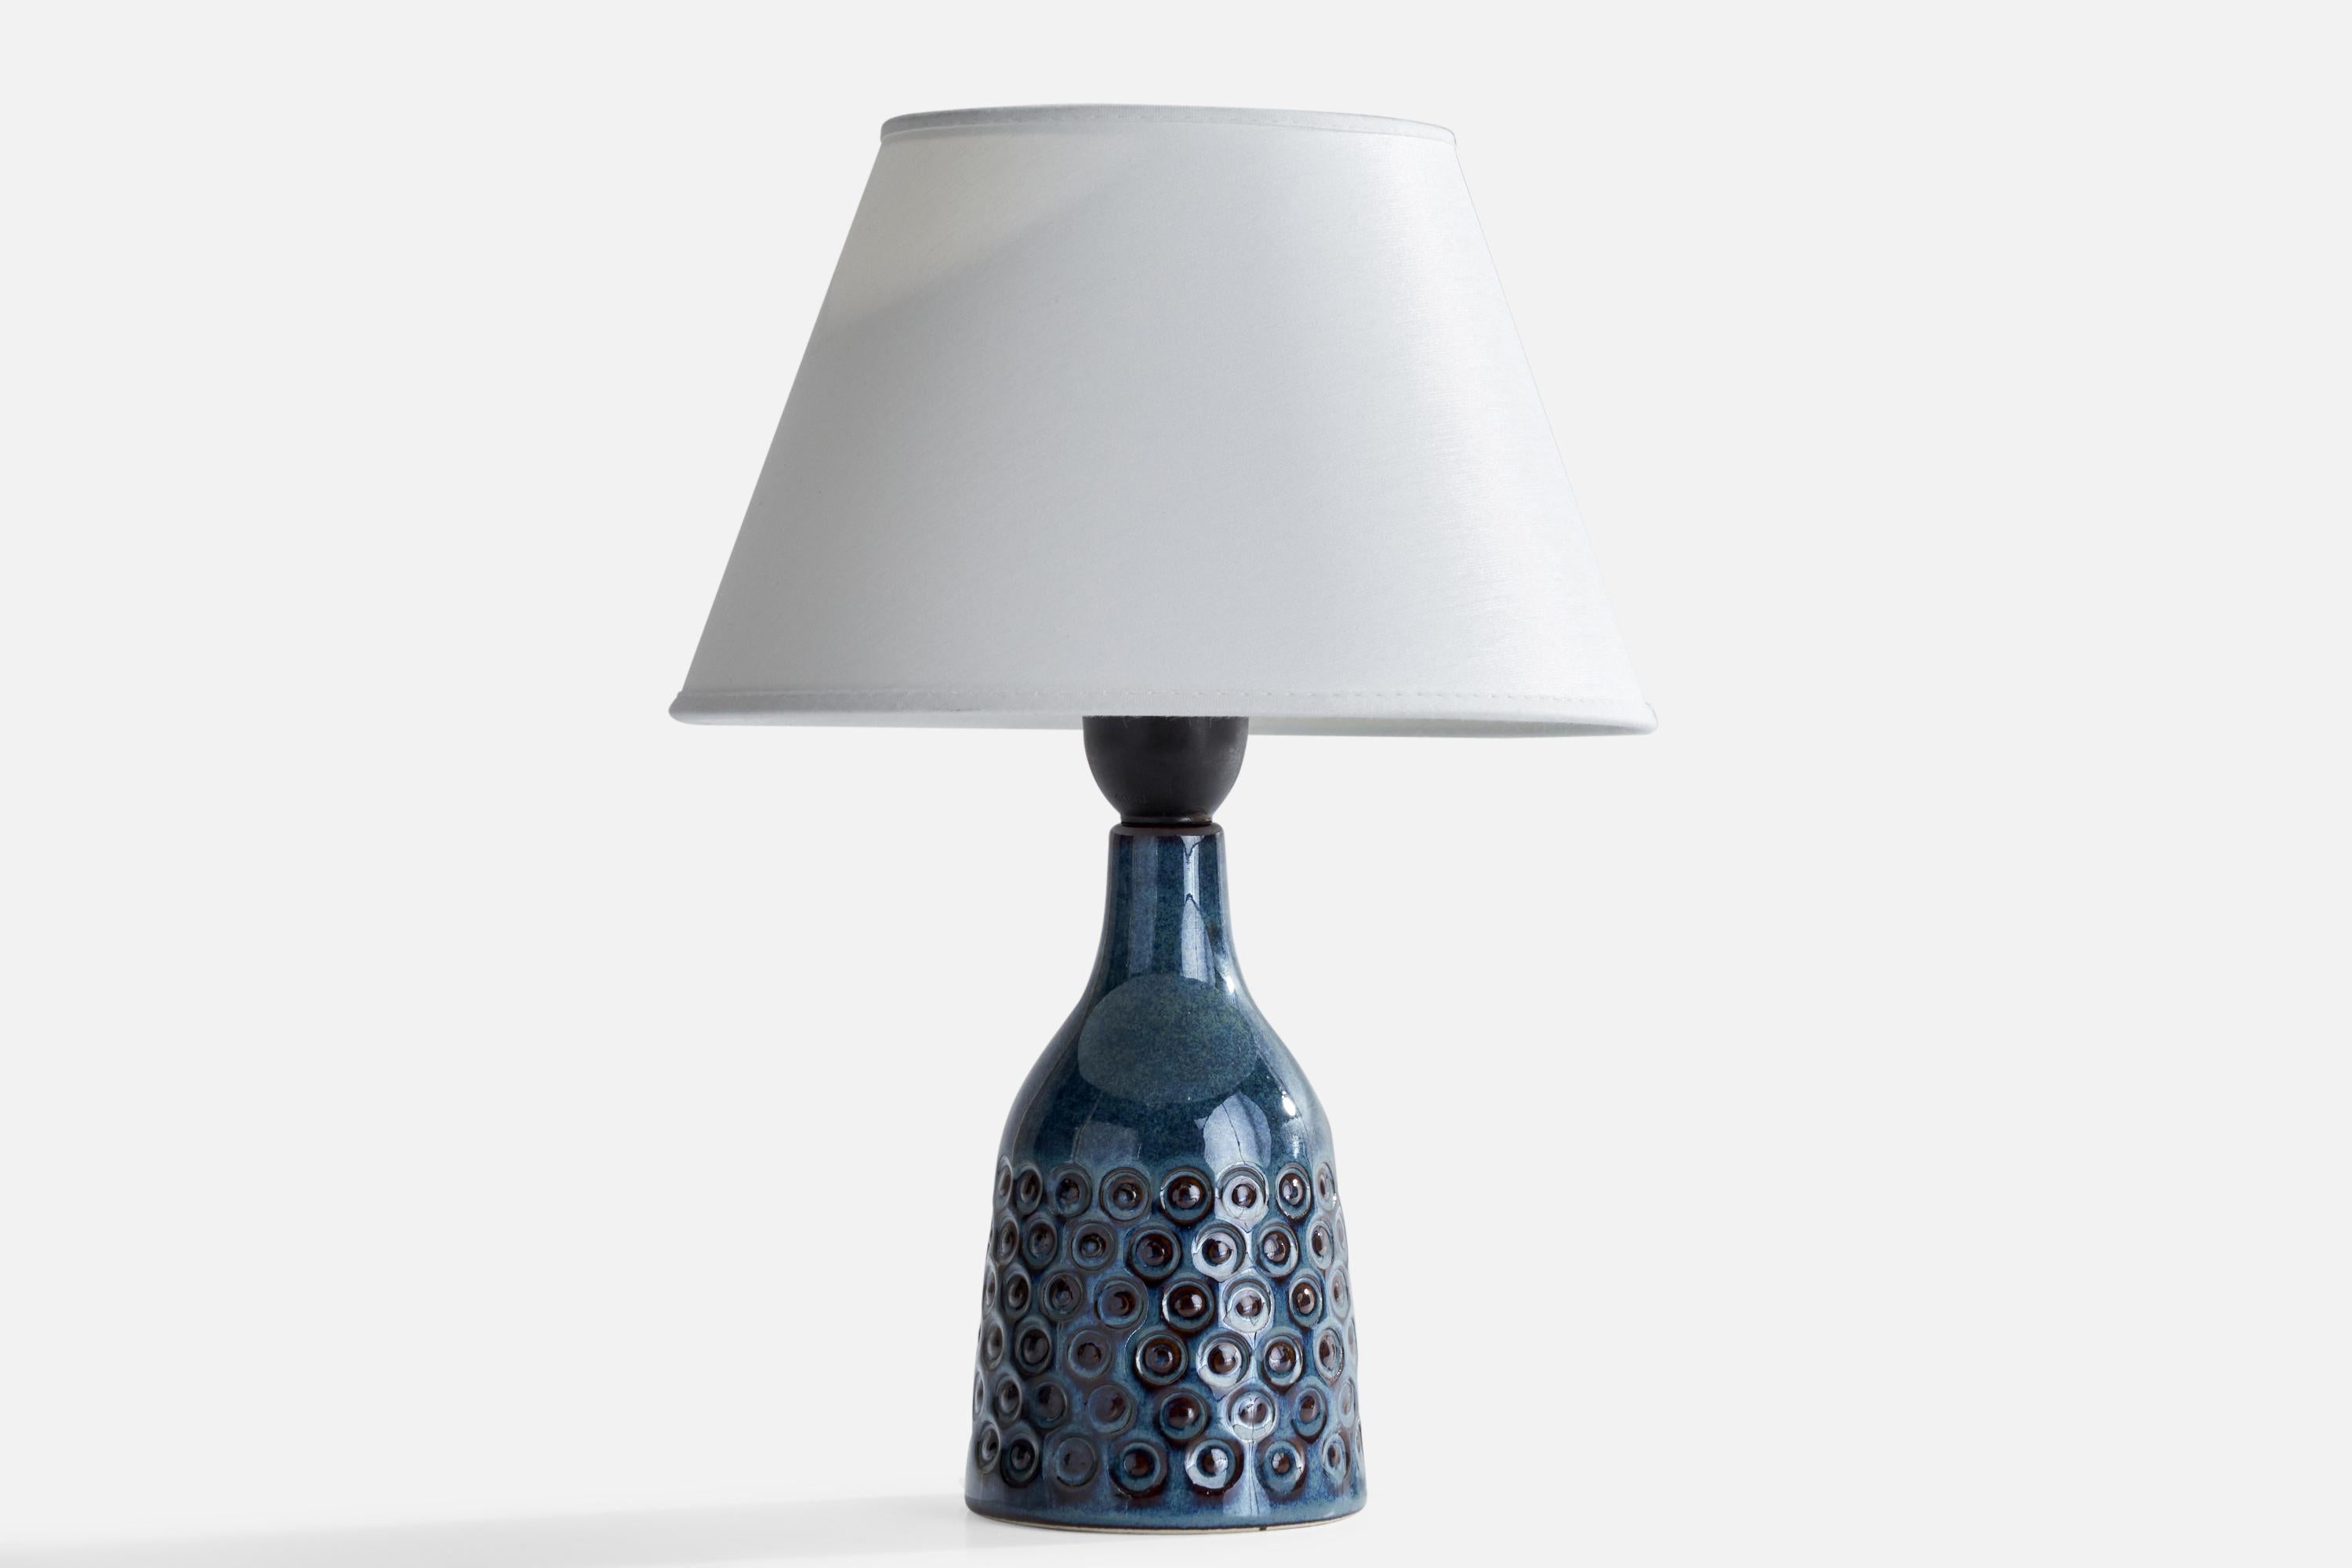 A blue-glazed stoneware table lamp designed and produced by Søholm, Bornholm, Denmark, c. 1960s.

Dimensions of Lamp (inches): 8.25”  H x 3.5”  Diameter
Dimensions of Shade (inches): 4.75” Top Diameter x 8.25”Bottom Diameter x 5.25” H
Dimensions of